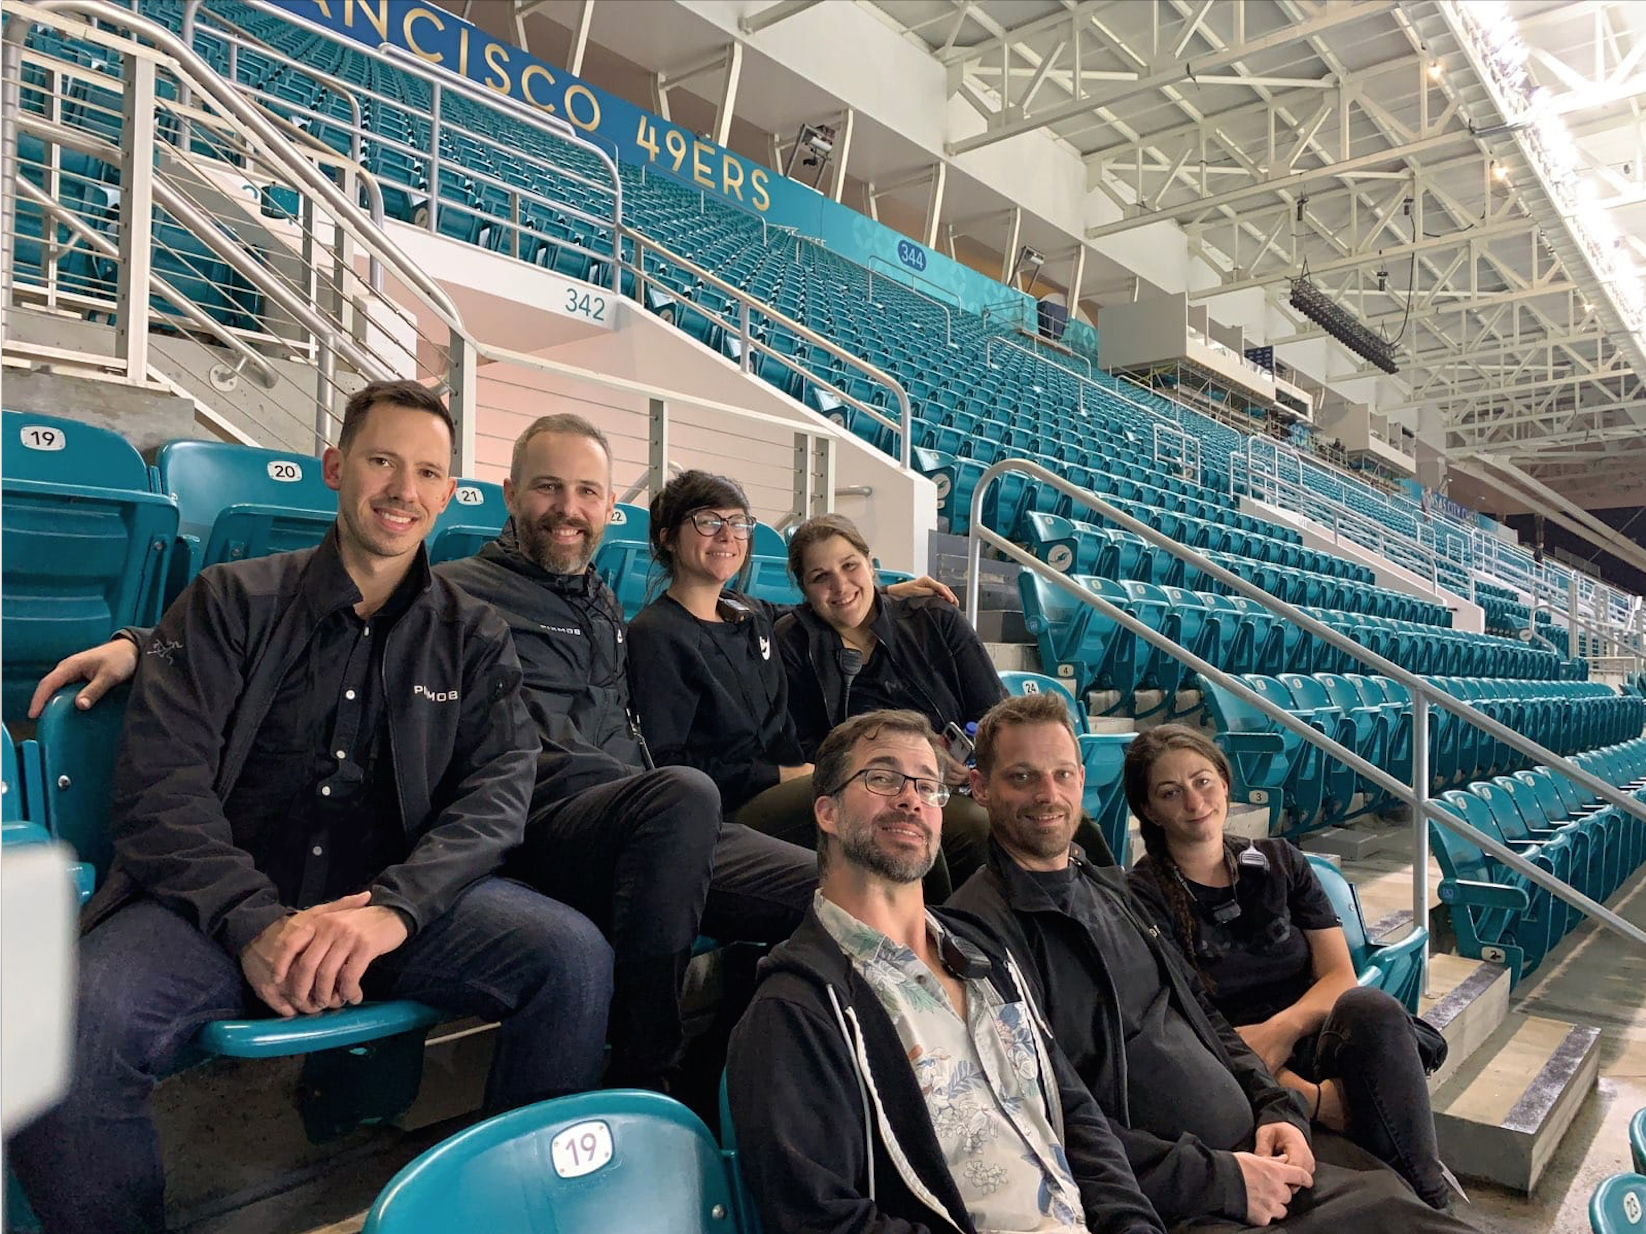 Montreal PixMob team in the stands pre-Super Bowl